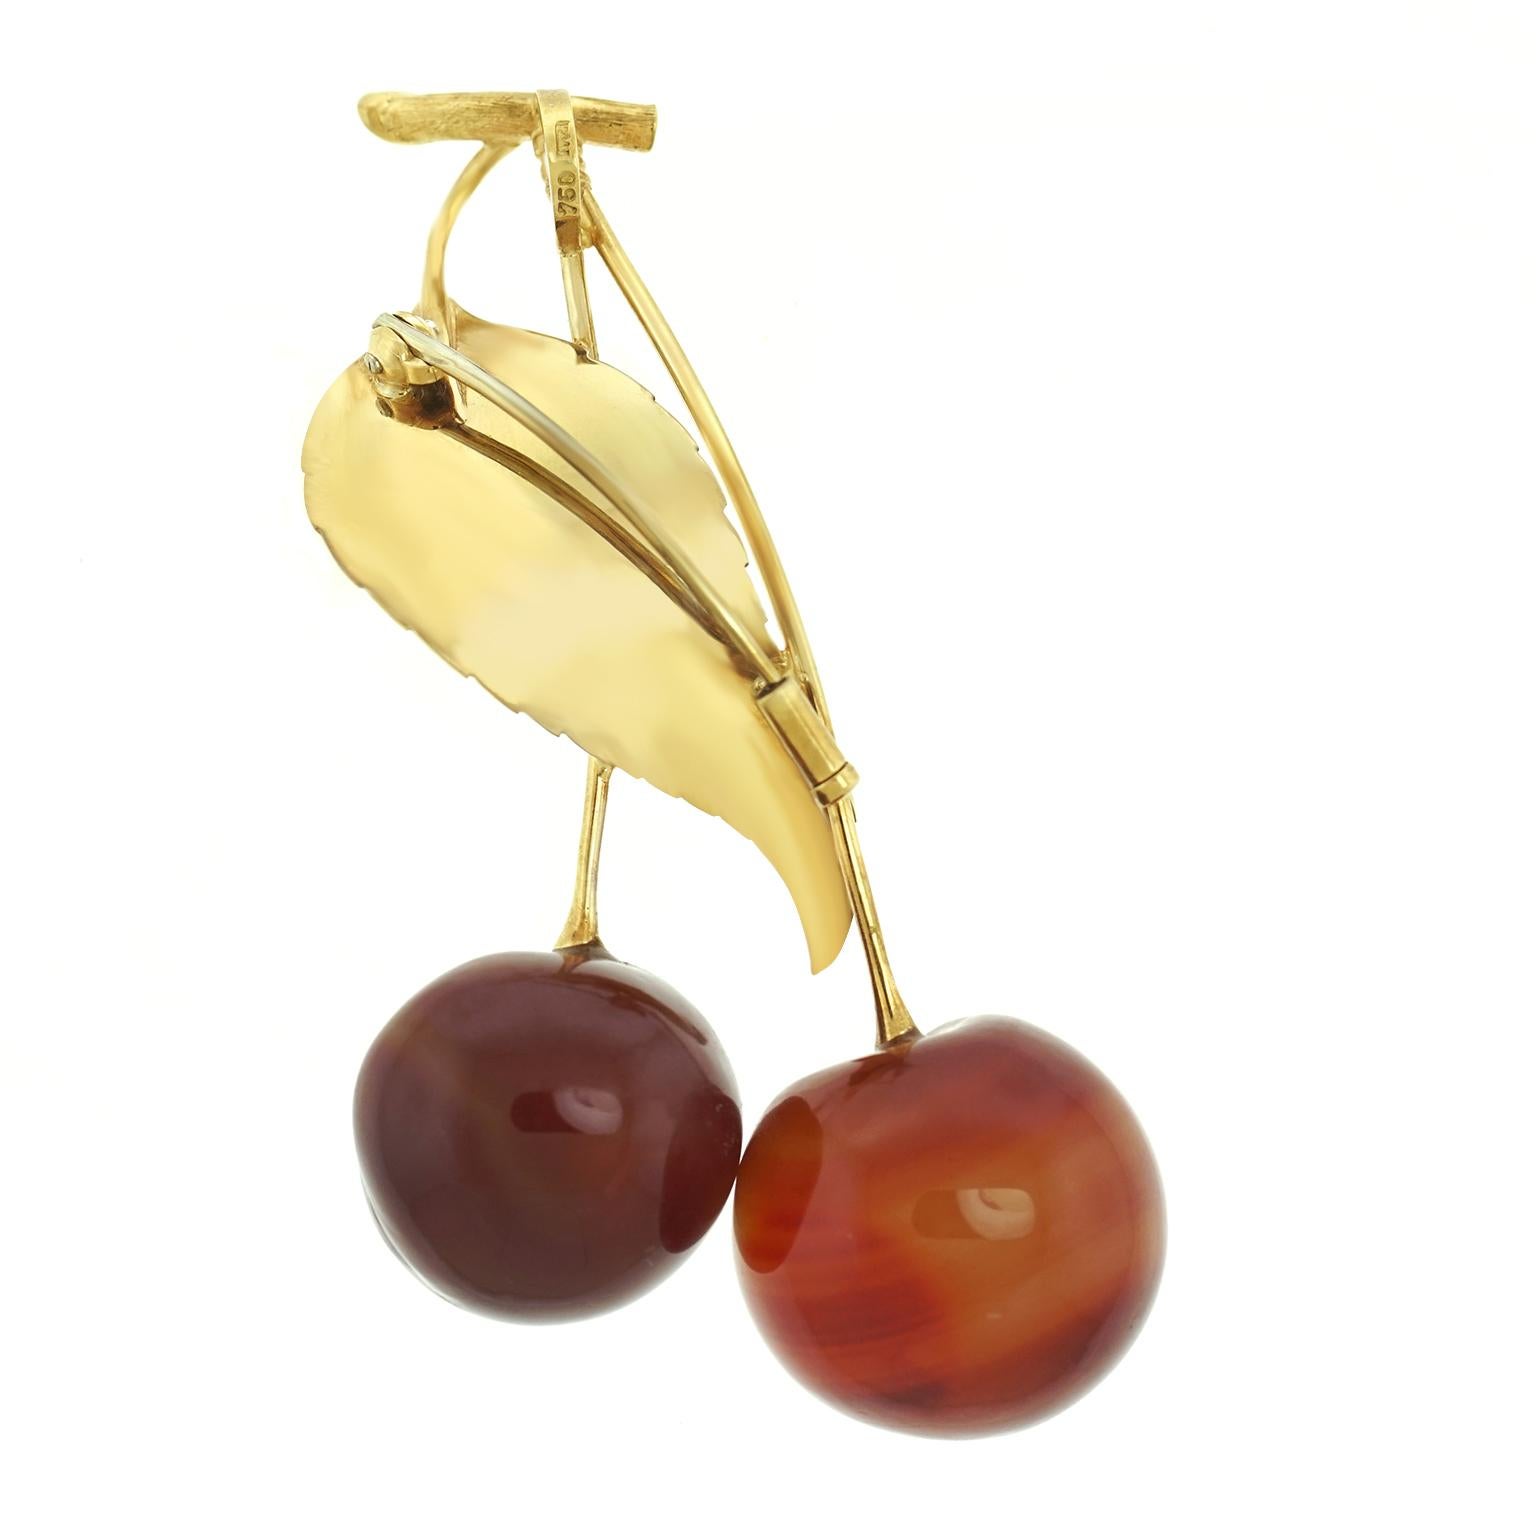 Women's or Men's Charming Cherries and Gold Brooch